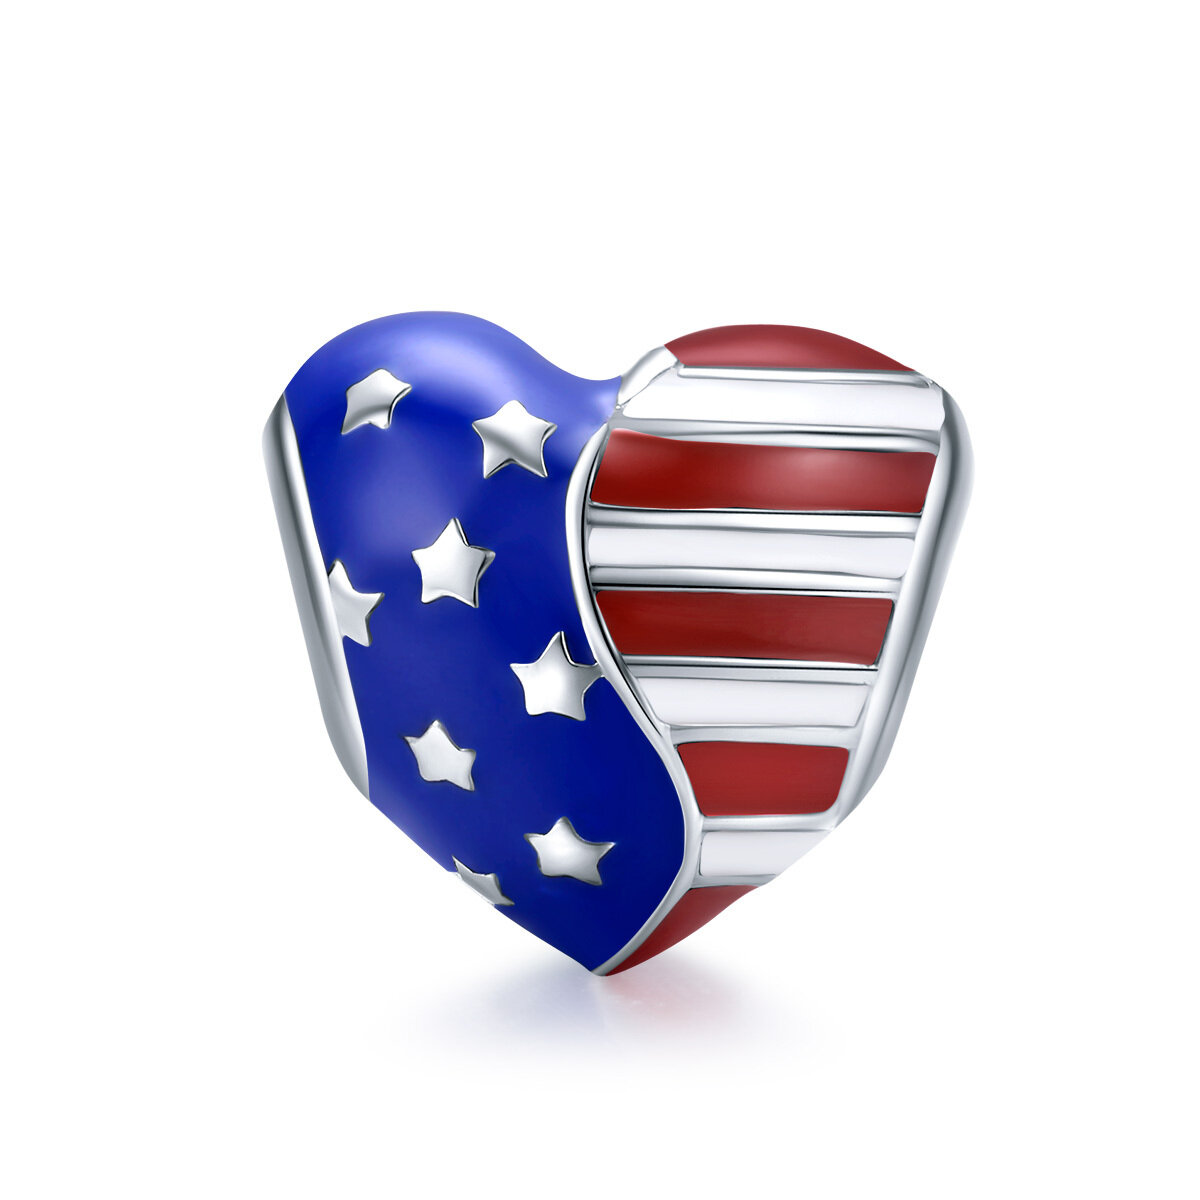 GemKing BSC281 American flag S925 Sterling Silver Charm